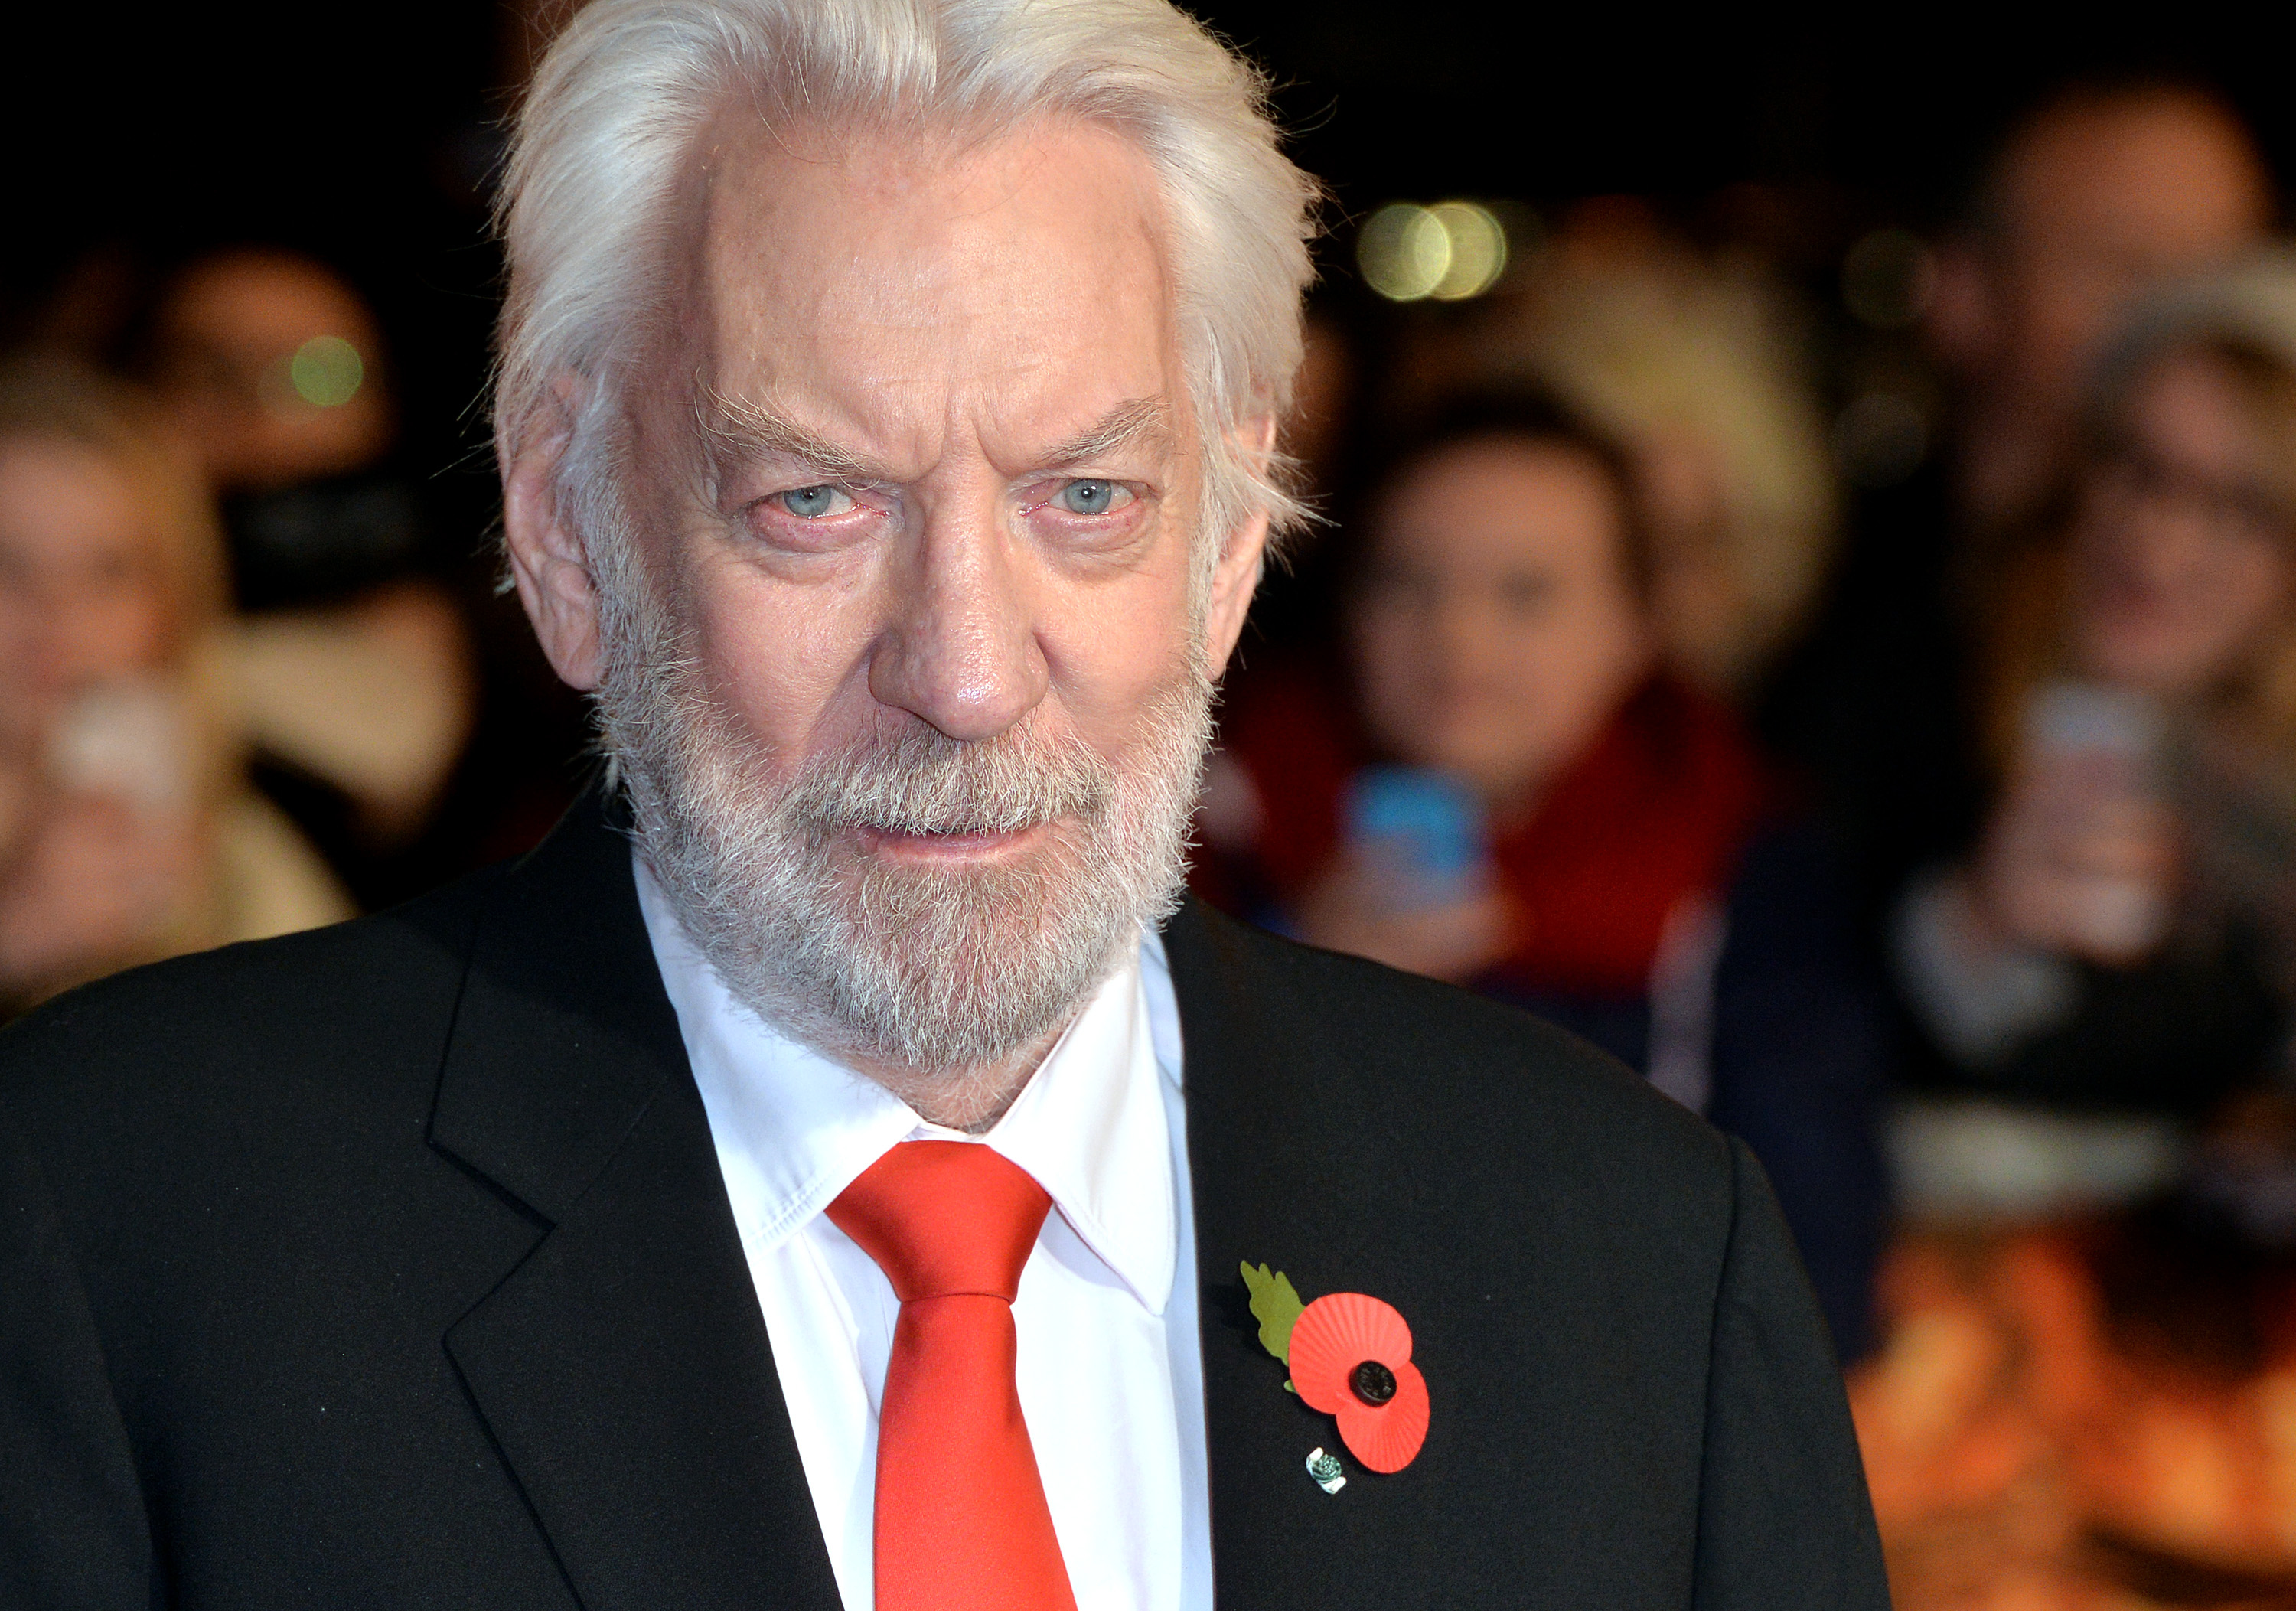 Donald Sutherland attends the world Ppremiere of "The Hunger Games: Mockingjay Part 1" at Odeon Leicester Square on November 10, 2014 in London, England. (Anthony Harvey&mdash;Getty Images)